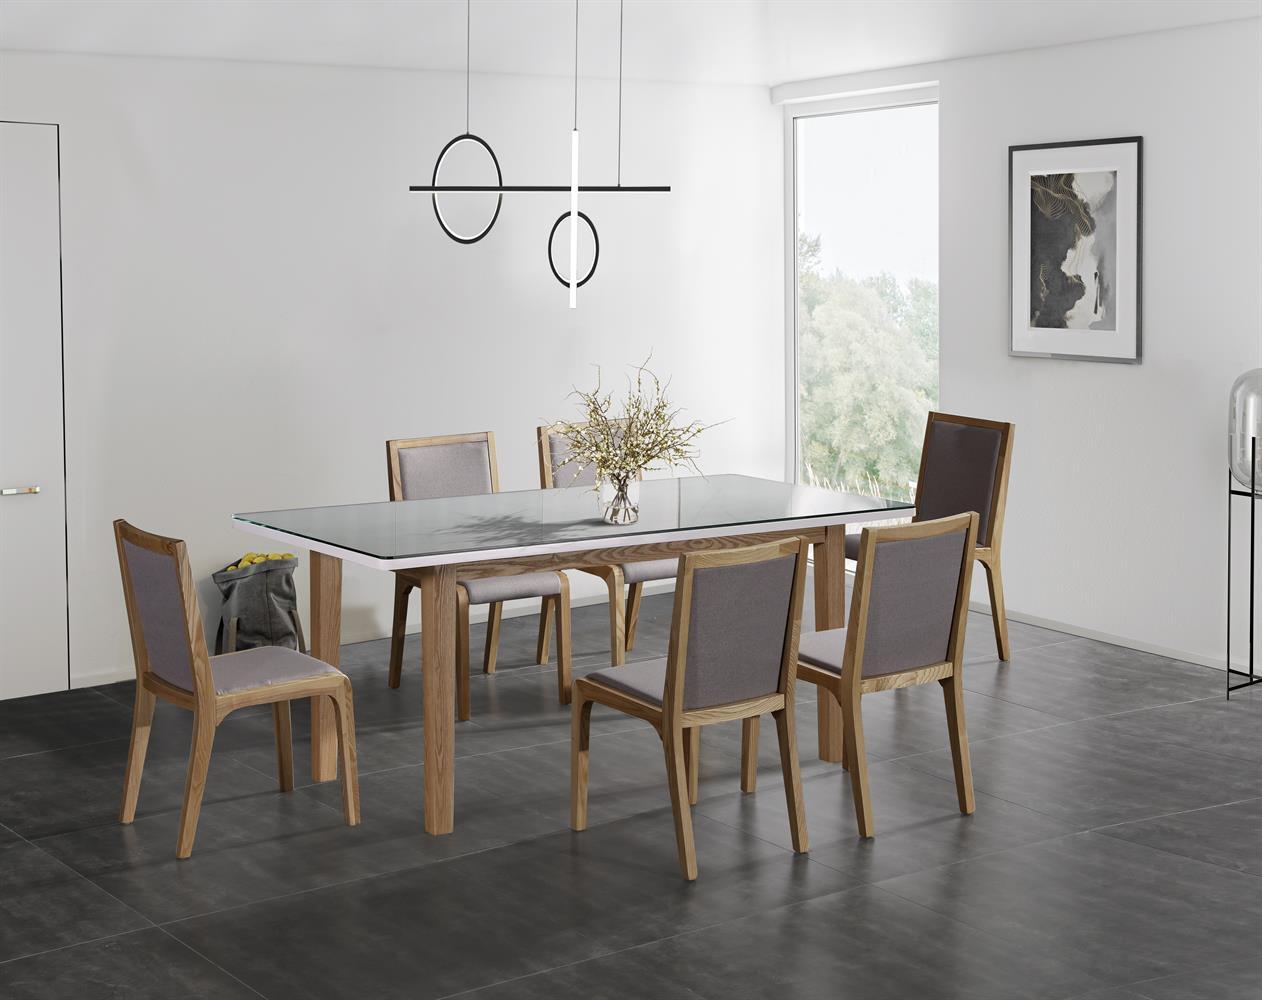 7 Pieces Dining Suite Dining Table & 6X Chairs in White Top High Glossy Wooden Base